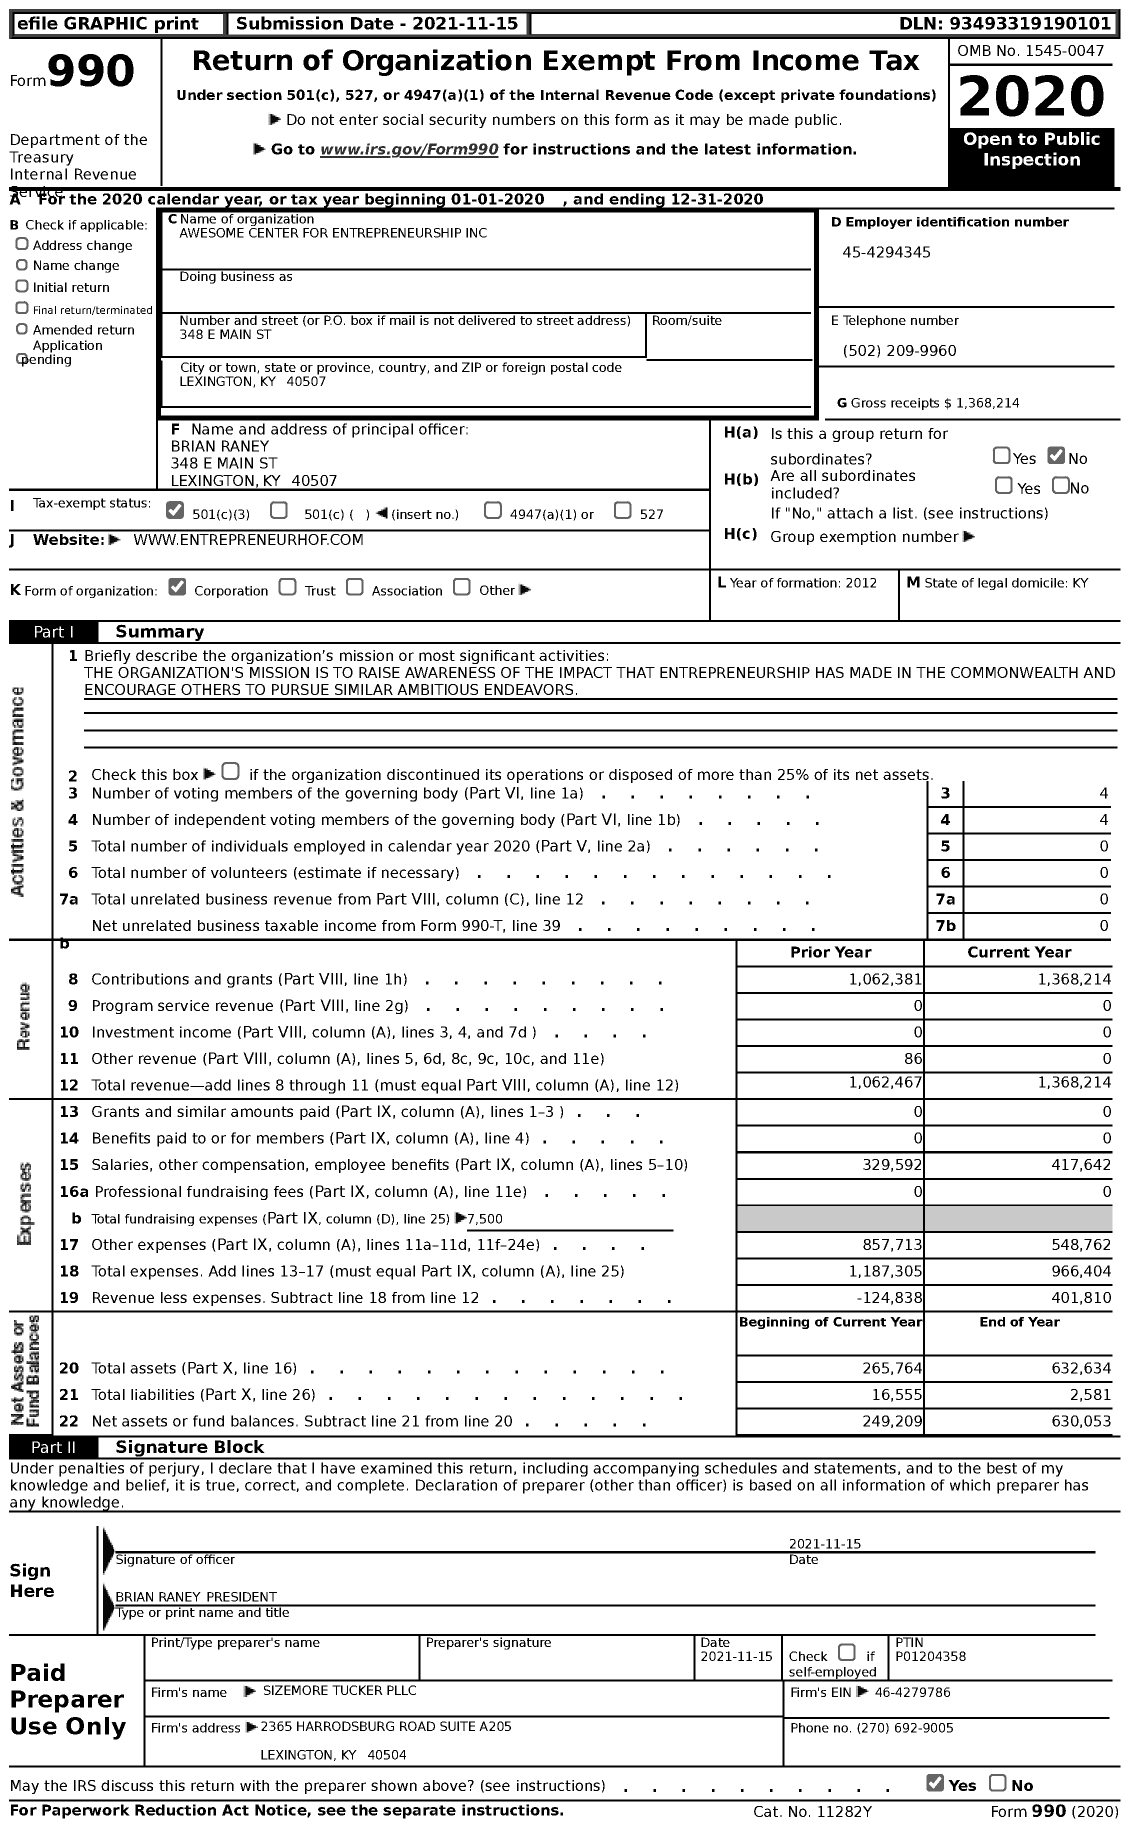 Image of first page of 2020 Form 990 for Awesome Center for Entrepreneurship